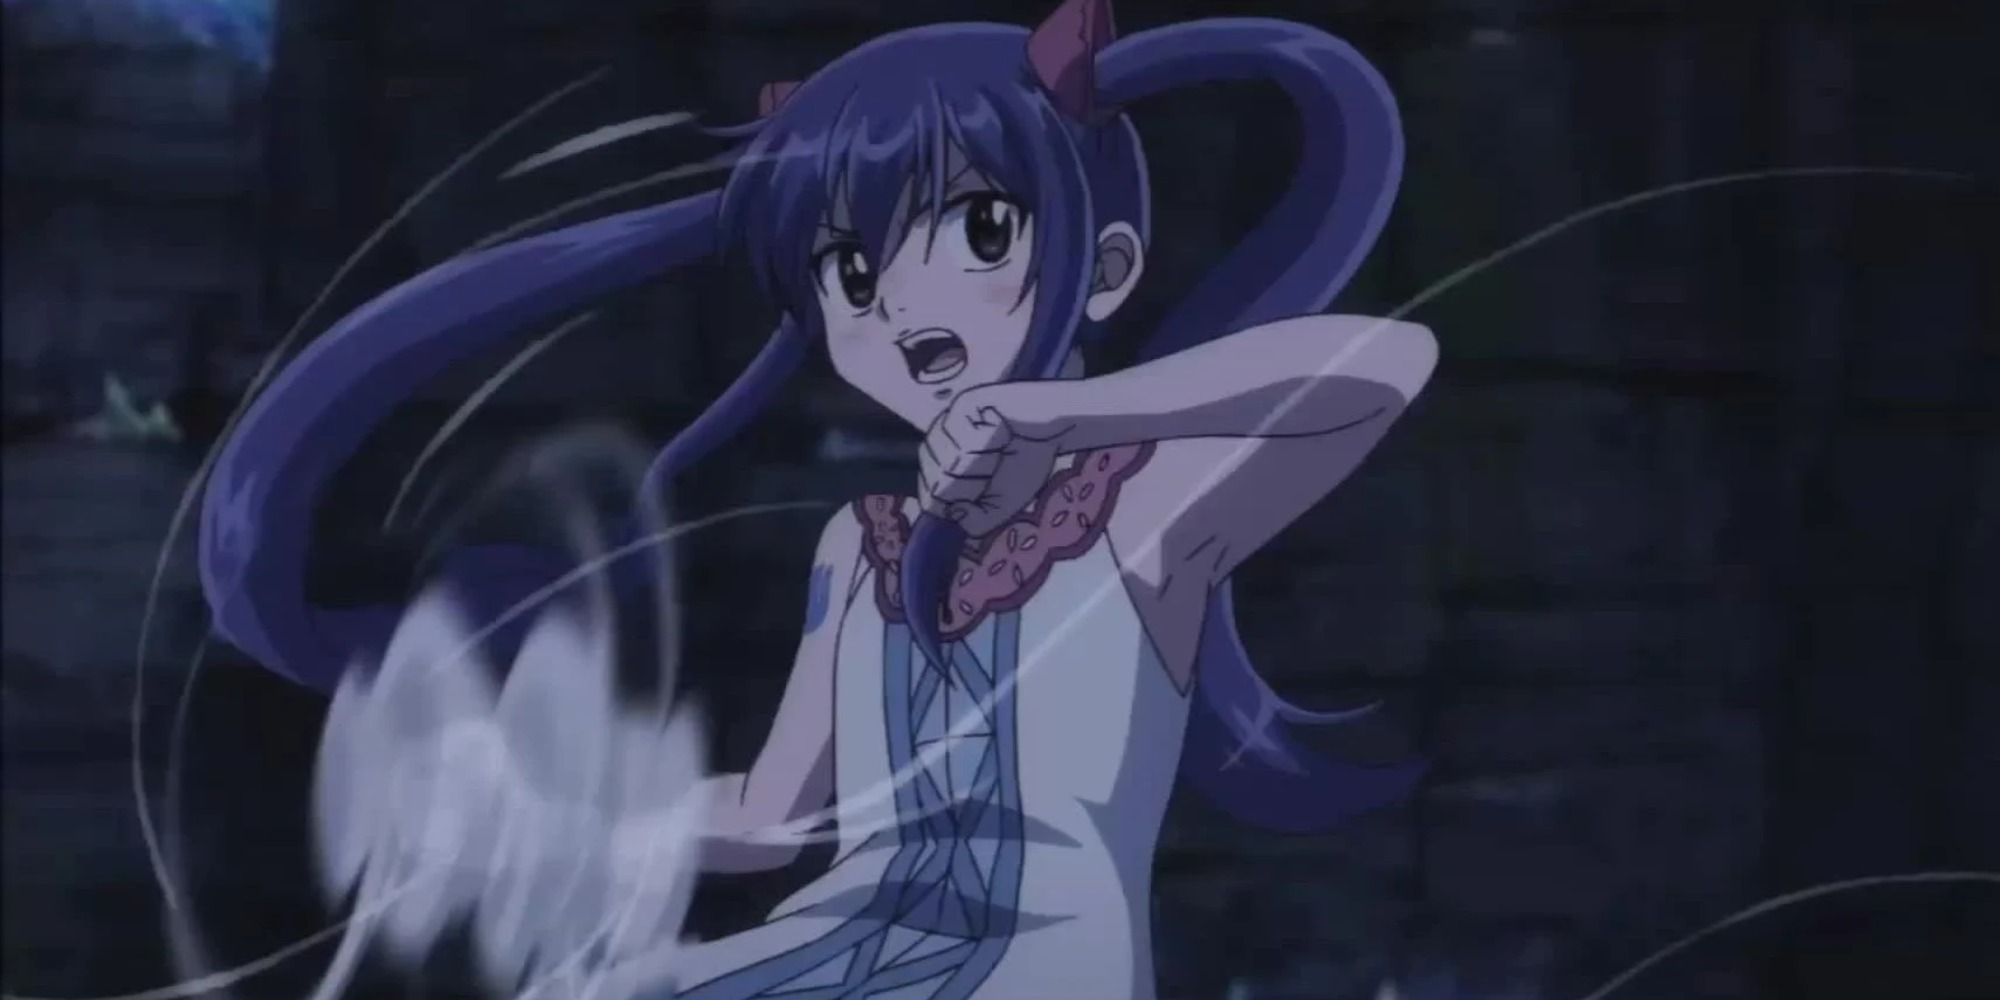 Wendy Marvell using a spell in Fairy Tail